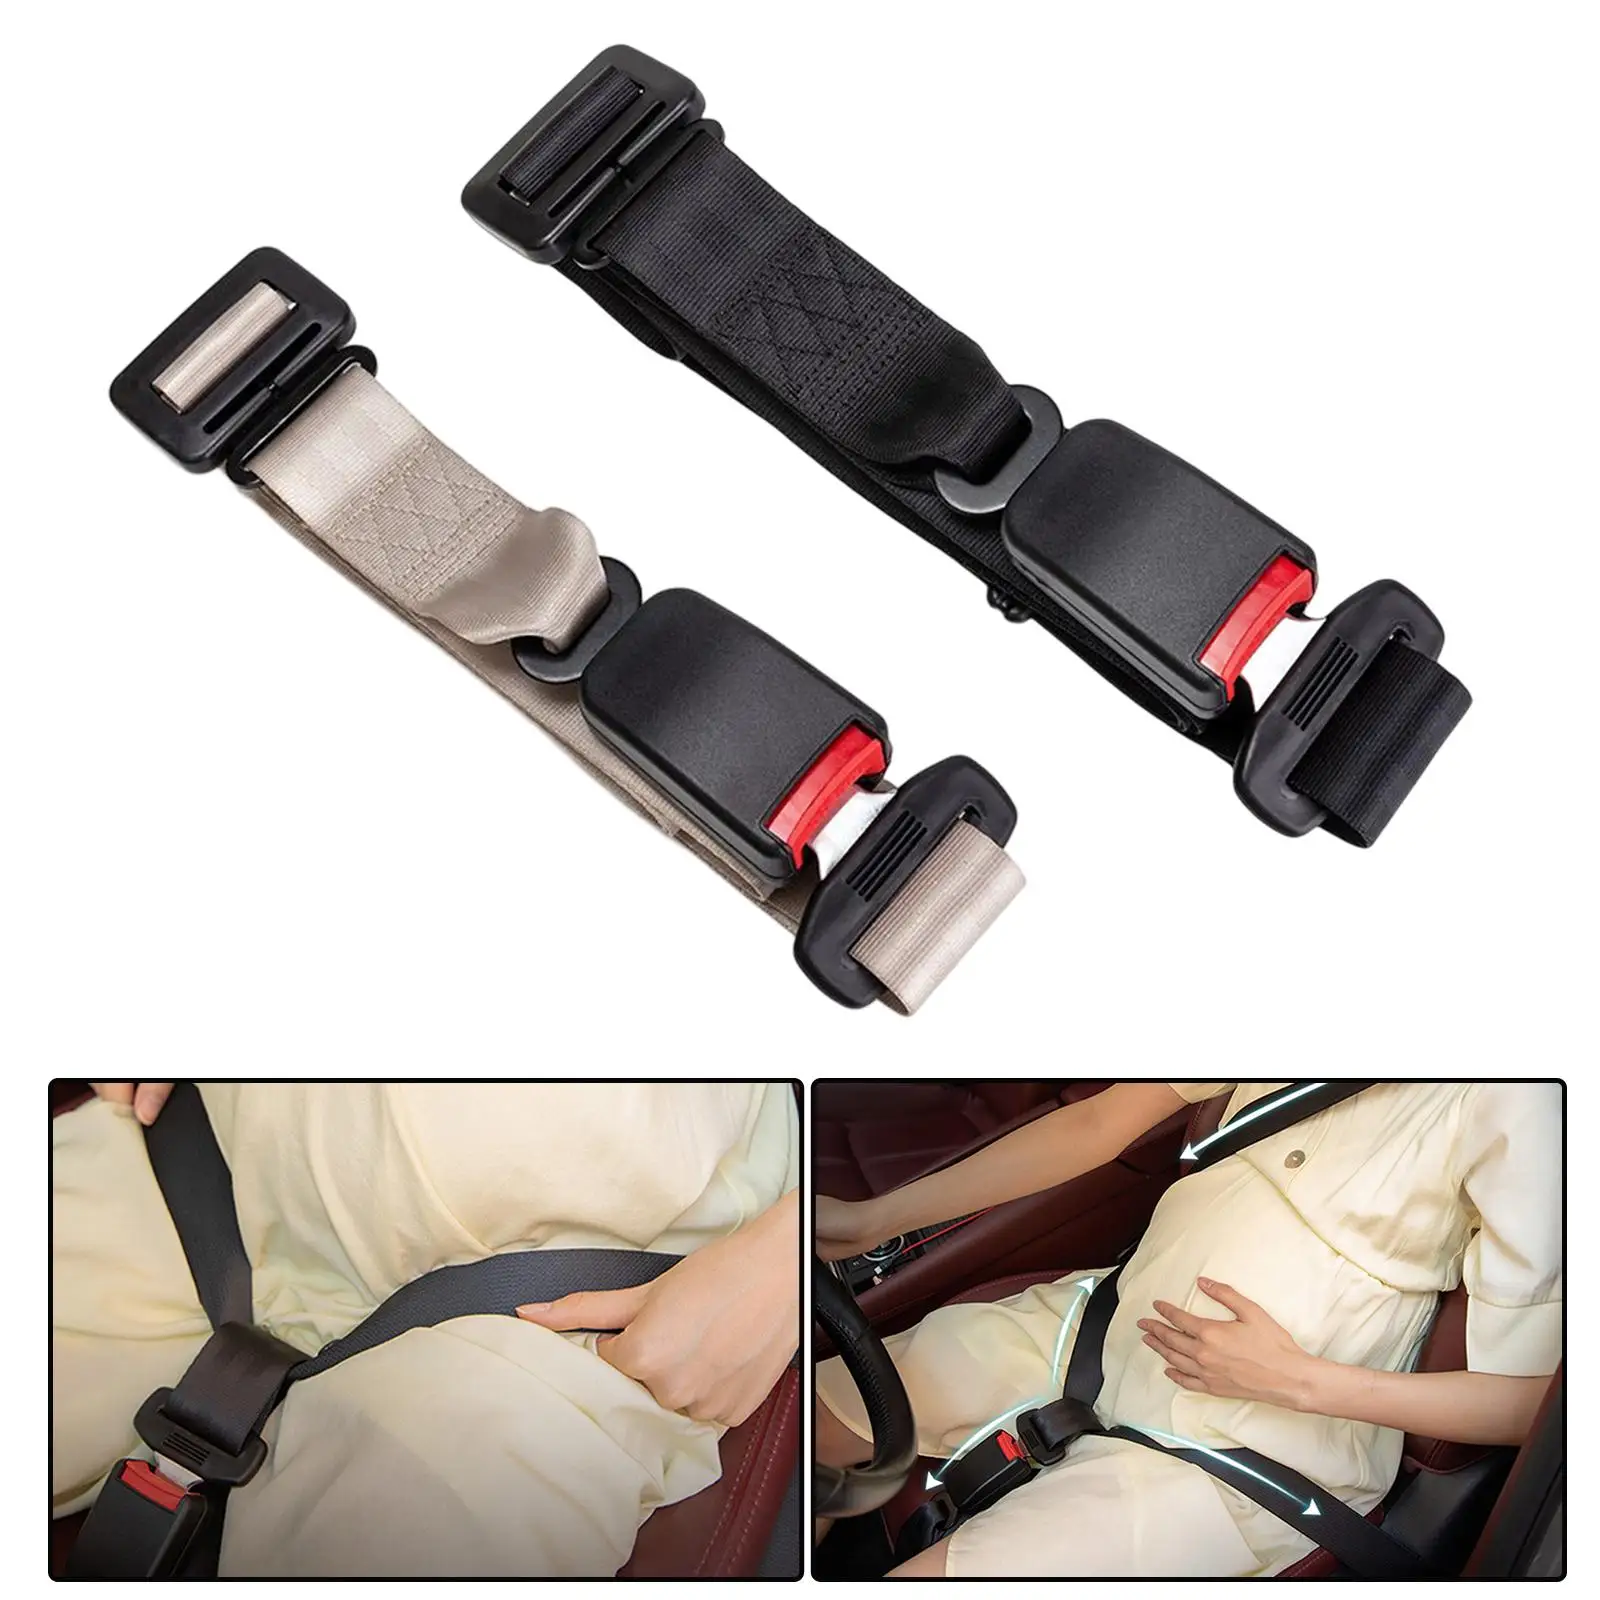 Pregnancy Car Seat Safety belt Protector for Pregnancy Woman